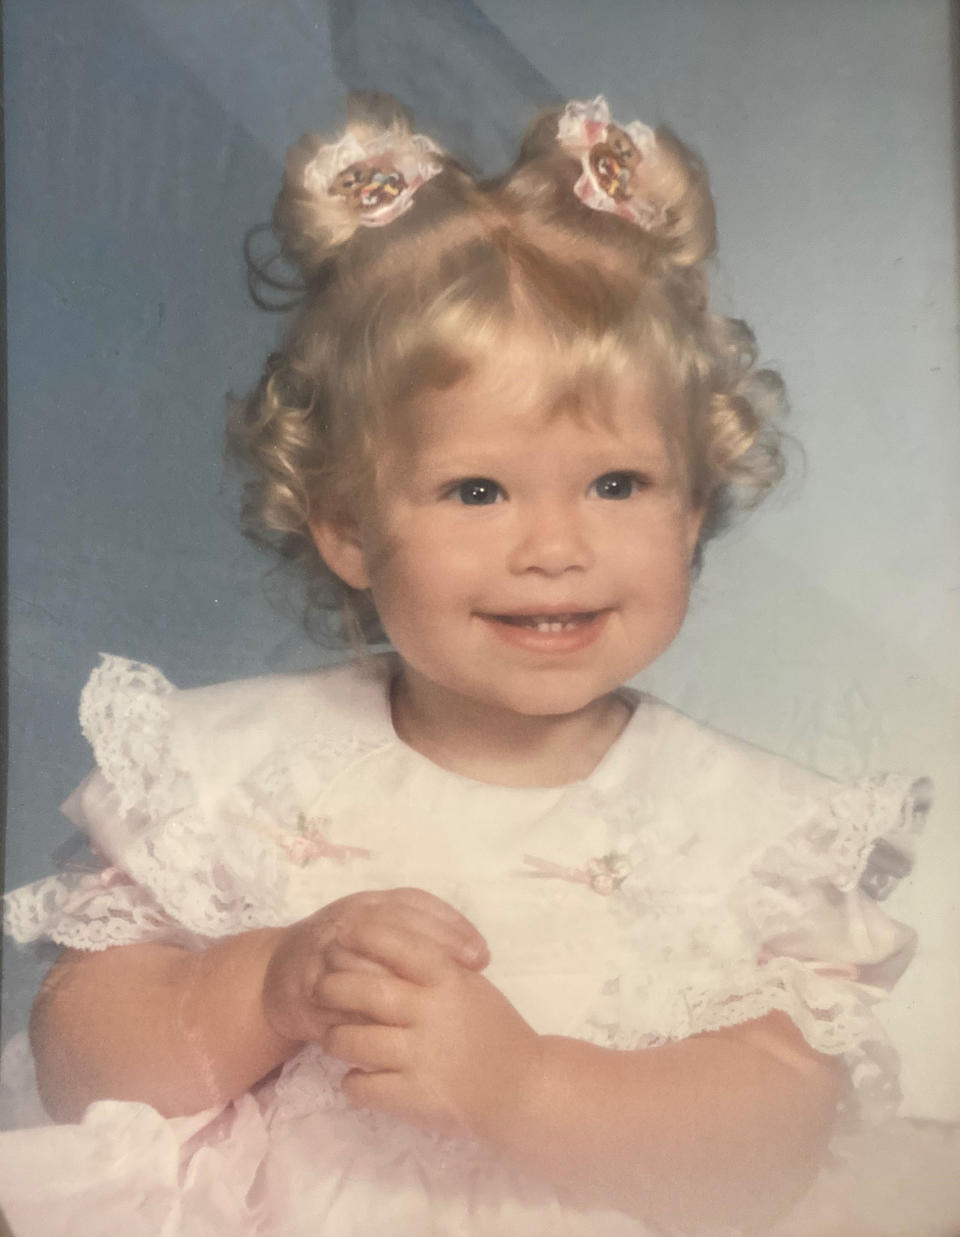 A baby picture of Jessica, who found out, after 30 years, that her dad was not her biological father. (Courtesy the Harvey family)